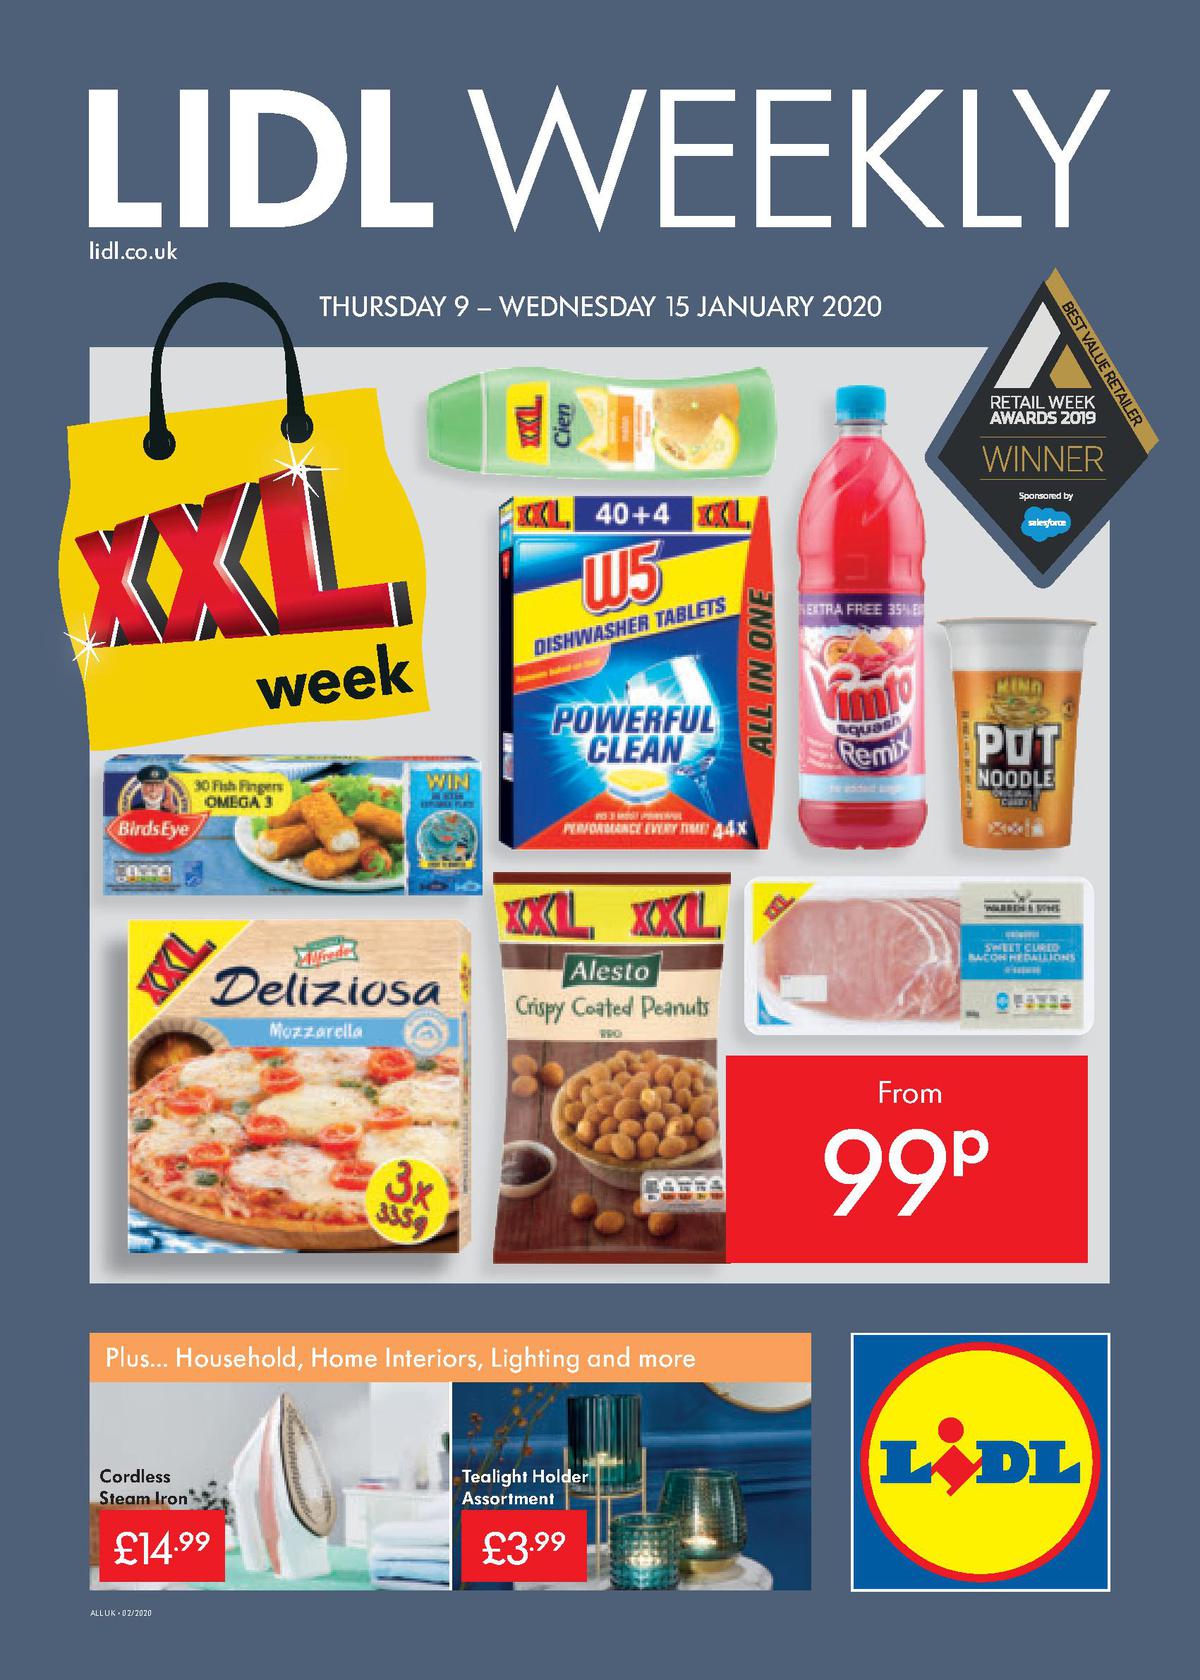 Lidl Uk - Offers & Special Buys From 9 January